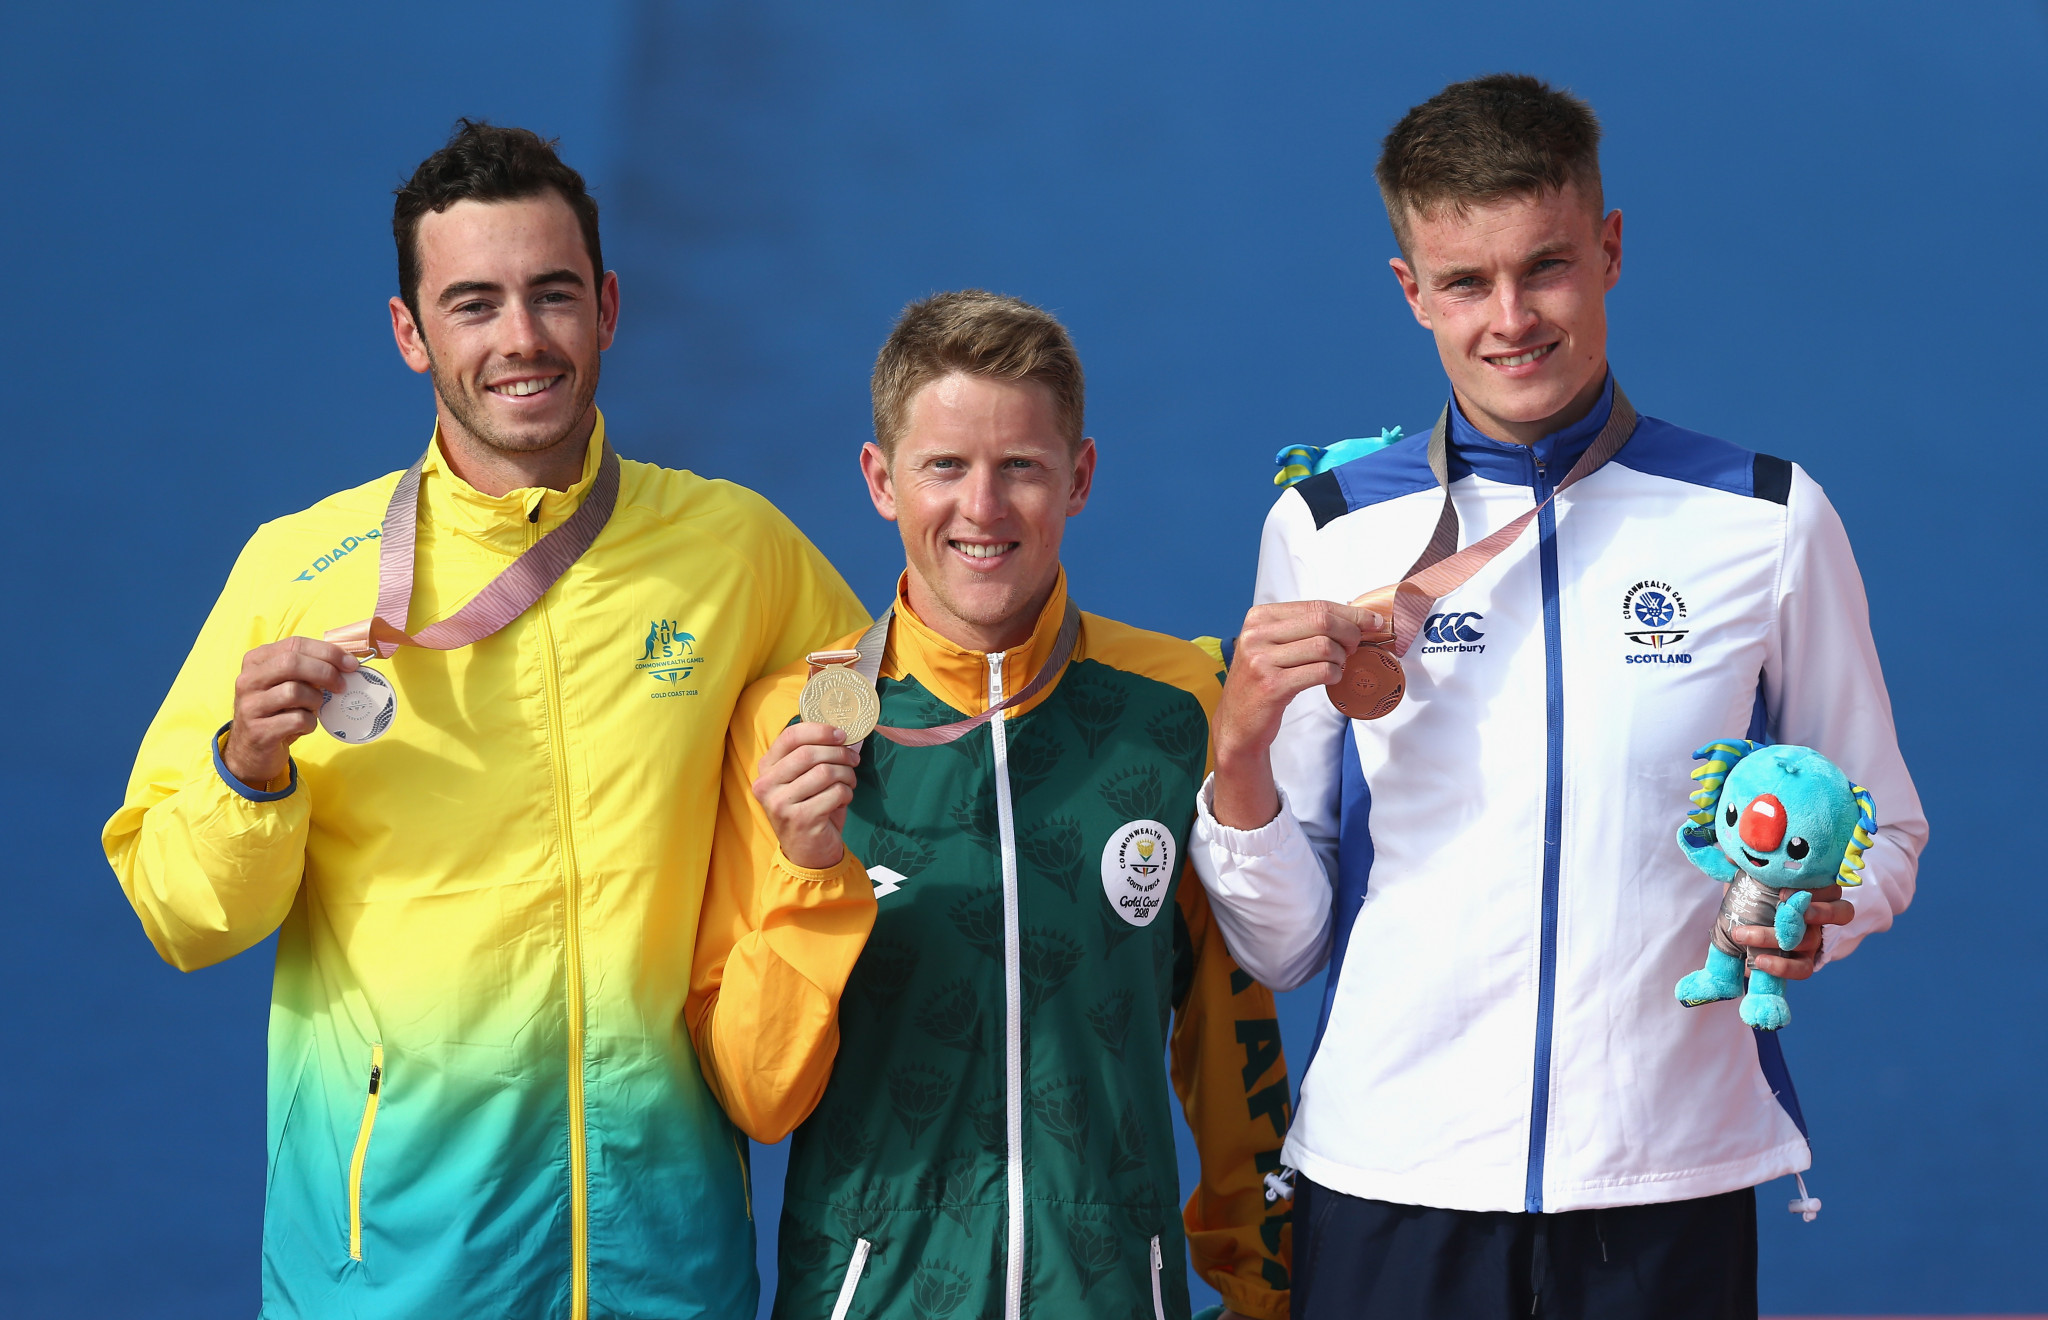 Marc Austin, right, won Scotland's first triathlon medal at the 2018 Commonwealth Games ©Getty Images